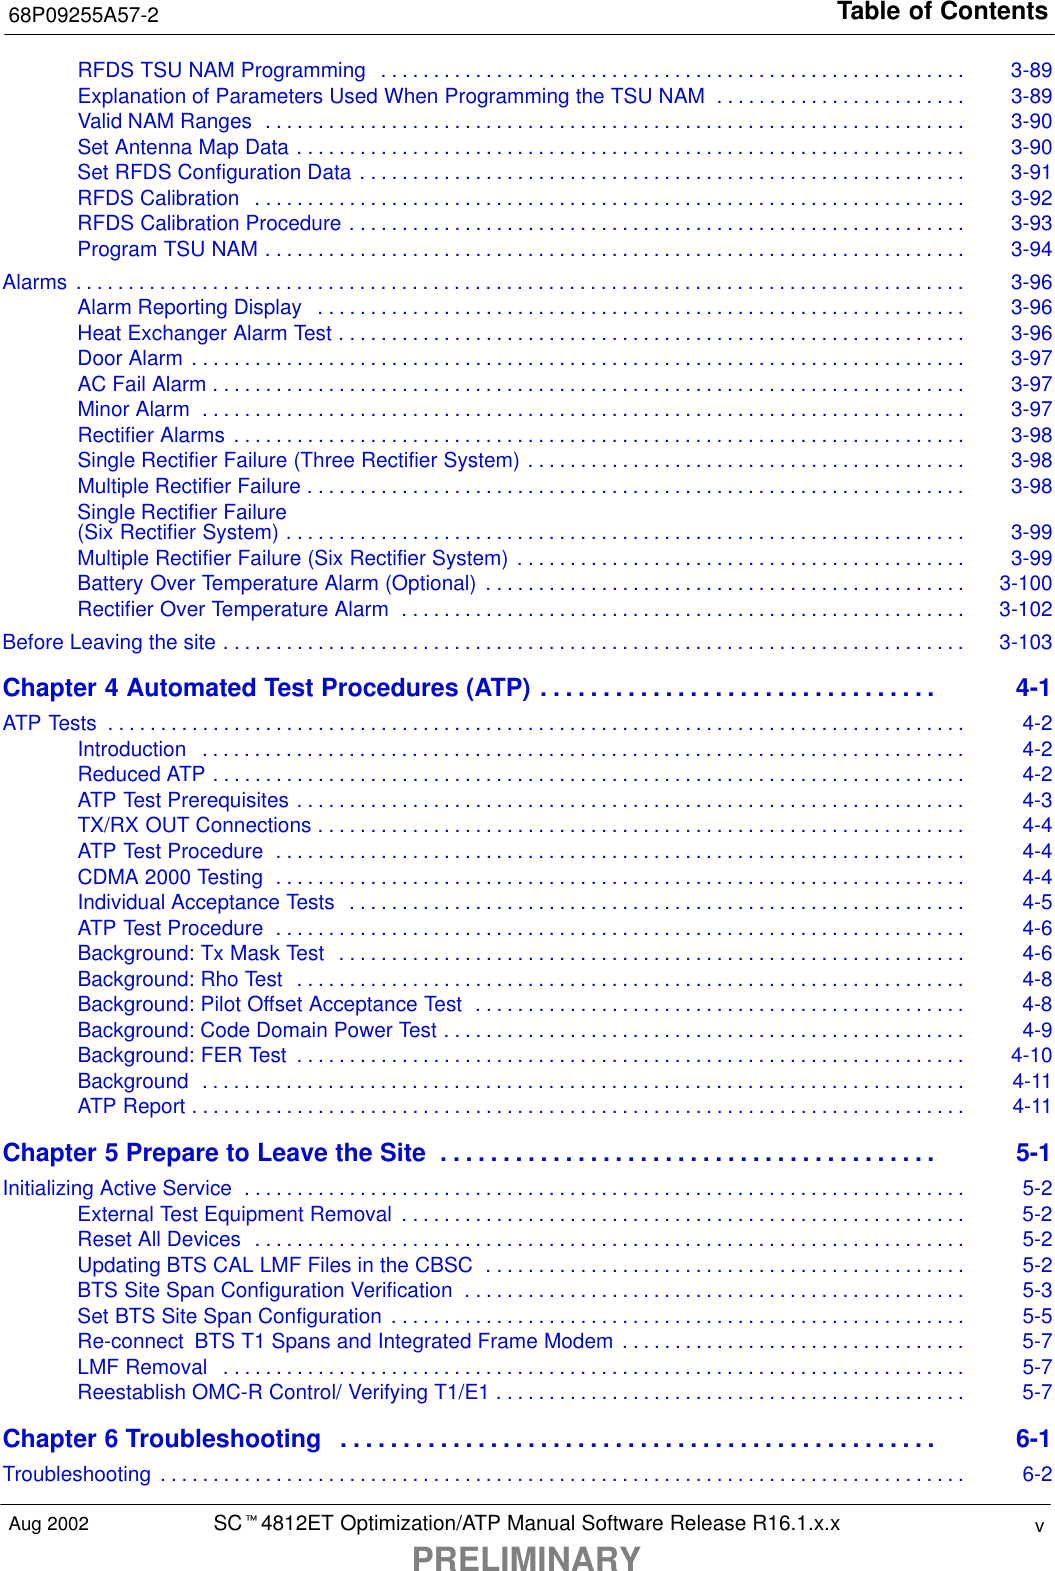 Table of Contents68P09255A57-2SCt4812ET Optimization/ATP Manual Software Release R16.1.x.xPRELIMINARYvAug 2002RFDS TSU NAM Programming 3-89. . . . . . . . . . . . . . . . . . . . . . . . . . . . . . . . . . . . . . . . . . . . . . . . . . . . . . . . Explanation of Parameters Used When Programming the TSU NAM 3-89. . . . . . . . . . . . . . . . . . . . . . . . Valid NAM Ranges 3-90. . . . . . . . . . . . . . . . . . . . . . . . . . . . . . . . . . . . . . . . . . . . . . . . . . . . . . . . . . . . . . . . . . . Set Antenna Map Data 3-90. . . . . . . . . . . . . . . . . . . . . . . . . . . . . . . . . . . . . . . . . . . . . . . . . . . . . . . . . . . . . . . . Set RFDS Configuration Data 3-91. . . . . . . . . . . . . . . . . . . . . . . . . . . . . . . . . . . . . . . . . . . . . . . . . . . . . . . . . . RFDS Calibration 3-92. . . . . . . . . . . . . . . . . . . . . . . . . . . . . . . . . . . . . . . . . . . . . . . . . . . . . . . . . . . . . . . . . . . . RFDS Calibration Procedure 3-93. . . . . . . . . . . . . . . . . . . . . . . . . . . . . . . . . . . . . . . . . . . . . . . . . . . . . . . . . . . Program TSU NAM 3-94. . . . . . . . . . . . . . . . . . . . . . . . . . . . . . . . . . . . . . . . . . . . . . . . . . . . . . . . . . . . . . . . . . . Alarms 3-96. . . . . . . . . . . . . . . . . . . . . . . . . . . . . . . . . . . . . . . . . . . . . . . . . . . . . . . . . . . . . . . . . . . . . . . . . . . . . . . . . . . . . Alarm Reporting Display 3-96. . . . . . . . . . . . . . . . . . . . . . . . . . . . . . . . . . . . . . . . . . . . . . . . . . . . . . . . . . . . . . Heat Exchanger Alarm Test 3-96. . . . . . . . . . . . . . . . . . . . . . . . . . . . . . . . . . . . . . . . . . . . . . . . . . . . . . . . . . . . Door Alarm 3-97. . . . . . . . . . . . . . . . . . . . . . . . . . . . . . . . . . . . . . . . . . . . . . . . . . . . . . . . . . . . . . . . . . . . . . . . . . AC Fail Alarm 3-97. . . . . . . . . . . . . . . . . . . . . . . . . . . . . . . . . . . . . . . . . . . . . . . . . . . . . . . . . . . . . . . . . . . . . . . . Minor Alarm 3-97. . . . . . . . . . . . . . . . . . . . . . . . . . . . . . . . . . . . . . . . . . . . . . . . . . . . . . . . . . . . . . . . . . . . . . . . . Rectifier Alarms 3-98. . . . . . . . . . . . . . . . . . . . . . . . . . . . . . . . . . . . . . . . . . . . . . . . . . . . . . . . . . . . . . . . . . . . . . Single Rectifier Failure (Three Rectifier System) 3-98. . . . . . . . . . . . . . . . . . . . . . . . . . . . . . . . . . . . . . . . . . Multiple Rectifier Failure 3-98. . . . . . . . . . . . . . . . . . . . . . . . . . . . . . . . . . . . . . . . . . . . . . . . . . . . . . . . . . . . . . . Single Rectifier Failure (Six Rectifier System) 3-99. . . . . . . . . . . . . . . . . . . . . . . . . . . . . . . . . . . . . . . . . . . . . . . . . . . . . . . . . . . . . . . . . Multiple Rectifier Failure (Six Rectifier System) 3-99. . . . . . . . . . . . . . . . . . . . . . . . . . . . . . . . . . . . . . . . . . . Battery Over Temperature Alarm (Optional) 3-100. . . . . . . . . . . . . . . . . . . . . . . . . . . . . . . . . . . . . . . . . . . . . . Rectifier Over Temperature Alarm 3-102. . . . . . . . . . . . . . . . . . . . . . . . . . . . . . . . . . . . . . . . . . . . . . . . . . . . . . Before Leaving the site 3-103. . . . . . . . . . . . . . . . . . . . . . . . . . . . . . . . . . . . . . . . . . . . . . . . . . . . . . . . . . . . . . . . . . . . . . . Chapter 4 Automated Test Procedures (ATP) 4-1. . . . . . . . . . . . . . . . . . . . . . . . . . . . . . . . ATP Tests 4-2. . . . . . . . . . . . . . . . . . . . . . . . . . . . . . . . . . . . . . . . . . . . . . . . . . . . . . . . . . . . . . . . . . . . . . . . . . . . . . . . . . Introduction 4-2. . . . . . . . . . . . . . . . . . . . . . . . . . . . . . . . . . . . . . . . . . . . . . . . . . . . . . . . . . . . . . . . . . . . . . . . . Reduced ATP 4-2. . . . . . . . . . . . . . . . . . . . . . . . . . . . . . . . . . . . . . . . . . . . . . . . . . . . . . . . . . . . . . . . . . . . . . . . ATP Test Prerequisites 4-3. . . . . . . . . . . . . . . . . . . . . . . . . . . . . . . . . . . . . . . . . . . . . . . . . . . . . . . . . . . . . . . . TX/RX OUT Connections 4-4. . . . . . . . . . . . . . . . . . . . . . . . . . . . . . . . . . . . . . . . . . . . . . . . . . . . . . . . . . . . . . ATP Test Procedure 4-4. . . . . . . . . . . . . . . . . . . . . . . . . . . . . . . . . . . . . . . . . . . . . . . . . . . . . . . . . . . . . . . . . . CDMA 2000 Testing 4-4. . . . . . . . . . . . . . . . . . . . . . . . . . . . . . . . . . . . . . . . . . . . . . . . . . . . . . . . . . . . . . . . . . Individual Acceptance Tests 4-5. . . . . . . . . . . . . . . . . . . . . . . . . . . . . . . . . . . . . . . . . . . . . . . . . . . . . . . . . . . ATP Test Procedure 4-6. . . . . . . . . . . . . . . . . . . . . . . . . . . . . . . . . . . . . . . . . . . . . . . . . . . . . . . . . . . . . . . . . . Background: Tx Mask Test 4-6. . . . . . . . . . . . . . . . . . . . . . . . . . . . . . . . . . . . . . . . . . . . . . . . . . . . . . . . . . . . Background: Rho Test 4-8. . . . . . . . . . . . . . . . . . . . . . . . . . . . . . . . . . . . . . . . . . . . . . . . . . . . . . . . . . . . . . . . Background: Pilot Offset Acceptance Test 4-8. . . . . . . . . . . . . . . . . . . . . . . . . . . . . . . . . . . . . . . . . . . . . . . Background: Code Domain Power Test 4-9. . . . . . . . . . . . . . . . . . . . . . . . . . . . . . . . . . . . . . . . . . . . . . . . . . Background: FER Test 4-10. . . . . . . . . . . . . . . . . . . . . . . . . . . . . . . . . . . . . . . . . . . . . . . . . . . . . . . . . . . . . . . . Background 4-11. . . . . . . . . . . . . . . . . . . . . . . . . . . . . . . . . . . . . . . . . . . . . . . . . . . . . . . . . . . . . . . . . . . . . . . . . ATP Report 4-11. . . . . . . . . . . . . . . . . . . . . . . . . . . . . . . . . . . . . . . . . . . . . . . . . . . . . . . . . . . . . . . . . . . . . . . . . . Chapter 5 Prepare to Leave the Site 5-1. . . . . . . . . . . . . . . . . . . . . . . . . . . . . . . . . . . . . . . . Initializing Active Service 5-2. . . . . . . . . . . . . . . . . . . . . . . . . . . . . . . . . . . . . . . . . . . . . . . . . . . . . . . . . . . . . . . . . . . . . External Test Equipment Removal 5-2. . . . . . . . . . . . . . . . . . . . . . . . . . . . . . . . . . . . . . . . . . . . . . . . . . . . . . Reset All Devices 5-2. . . . . . . . . . . . . . . . . . . . . . . . . . . . . . . . . . . . . . . . . . . . . . . . . . . . . . . . . . . . . . . . . . . . Updating BTS CAL LMF Files in the CBSC 5-2. . . . . . . . . . . . . . . . . . . . . . . . . . . . . . . . . . . . . . . . . . . . . . BTS Site Span Configuration Verification 5-3. . . . . . . . . . . . . . . . . . . . . . . . . . . . . . . . . . . . . . . . . . . . . . . . Set BTS Site Span Configuration 5-5. . . . . . . . . . . . . . . . . . . . . . . . . . . . . . . . . . . . . . . . . . . . . . . . . . . . . . . Re-connect  BTS T1 Spans and Integrated Frame Modem 5-7. . . . . . . . . . . . . . . . . . . . . . . . . . . . . . . . . LMF Removal 5-7. . . . . . . . . . . . . . . . . . . . . . . . . . . . . . . . . . . . . . . . . . . . . . . . . . . . . . . . . . . . . . . . . . . . . . . Reestablish OMC-R Control/ Verifying T1/E1 5-7. . . . . . . . . . . . . . . . . . . . . . . . . . . . . . . . . . . . . . . . . . . . . Chapter 6 Troubleshooting 6-1. . . . . . . . . . . . . . . . . . . . . . . . . . . . . . . . . . . . . . . . . . . . . . . . Troubleshooting 6-2. . . . . . . . . . . . . . . . . . . . . . . . . . . . . . . . . . . . . . . . . . . . . . . . . . . . . . . . . . . . . . . . . . . . . . . . . . . . . 